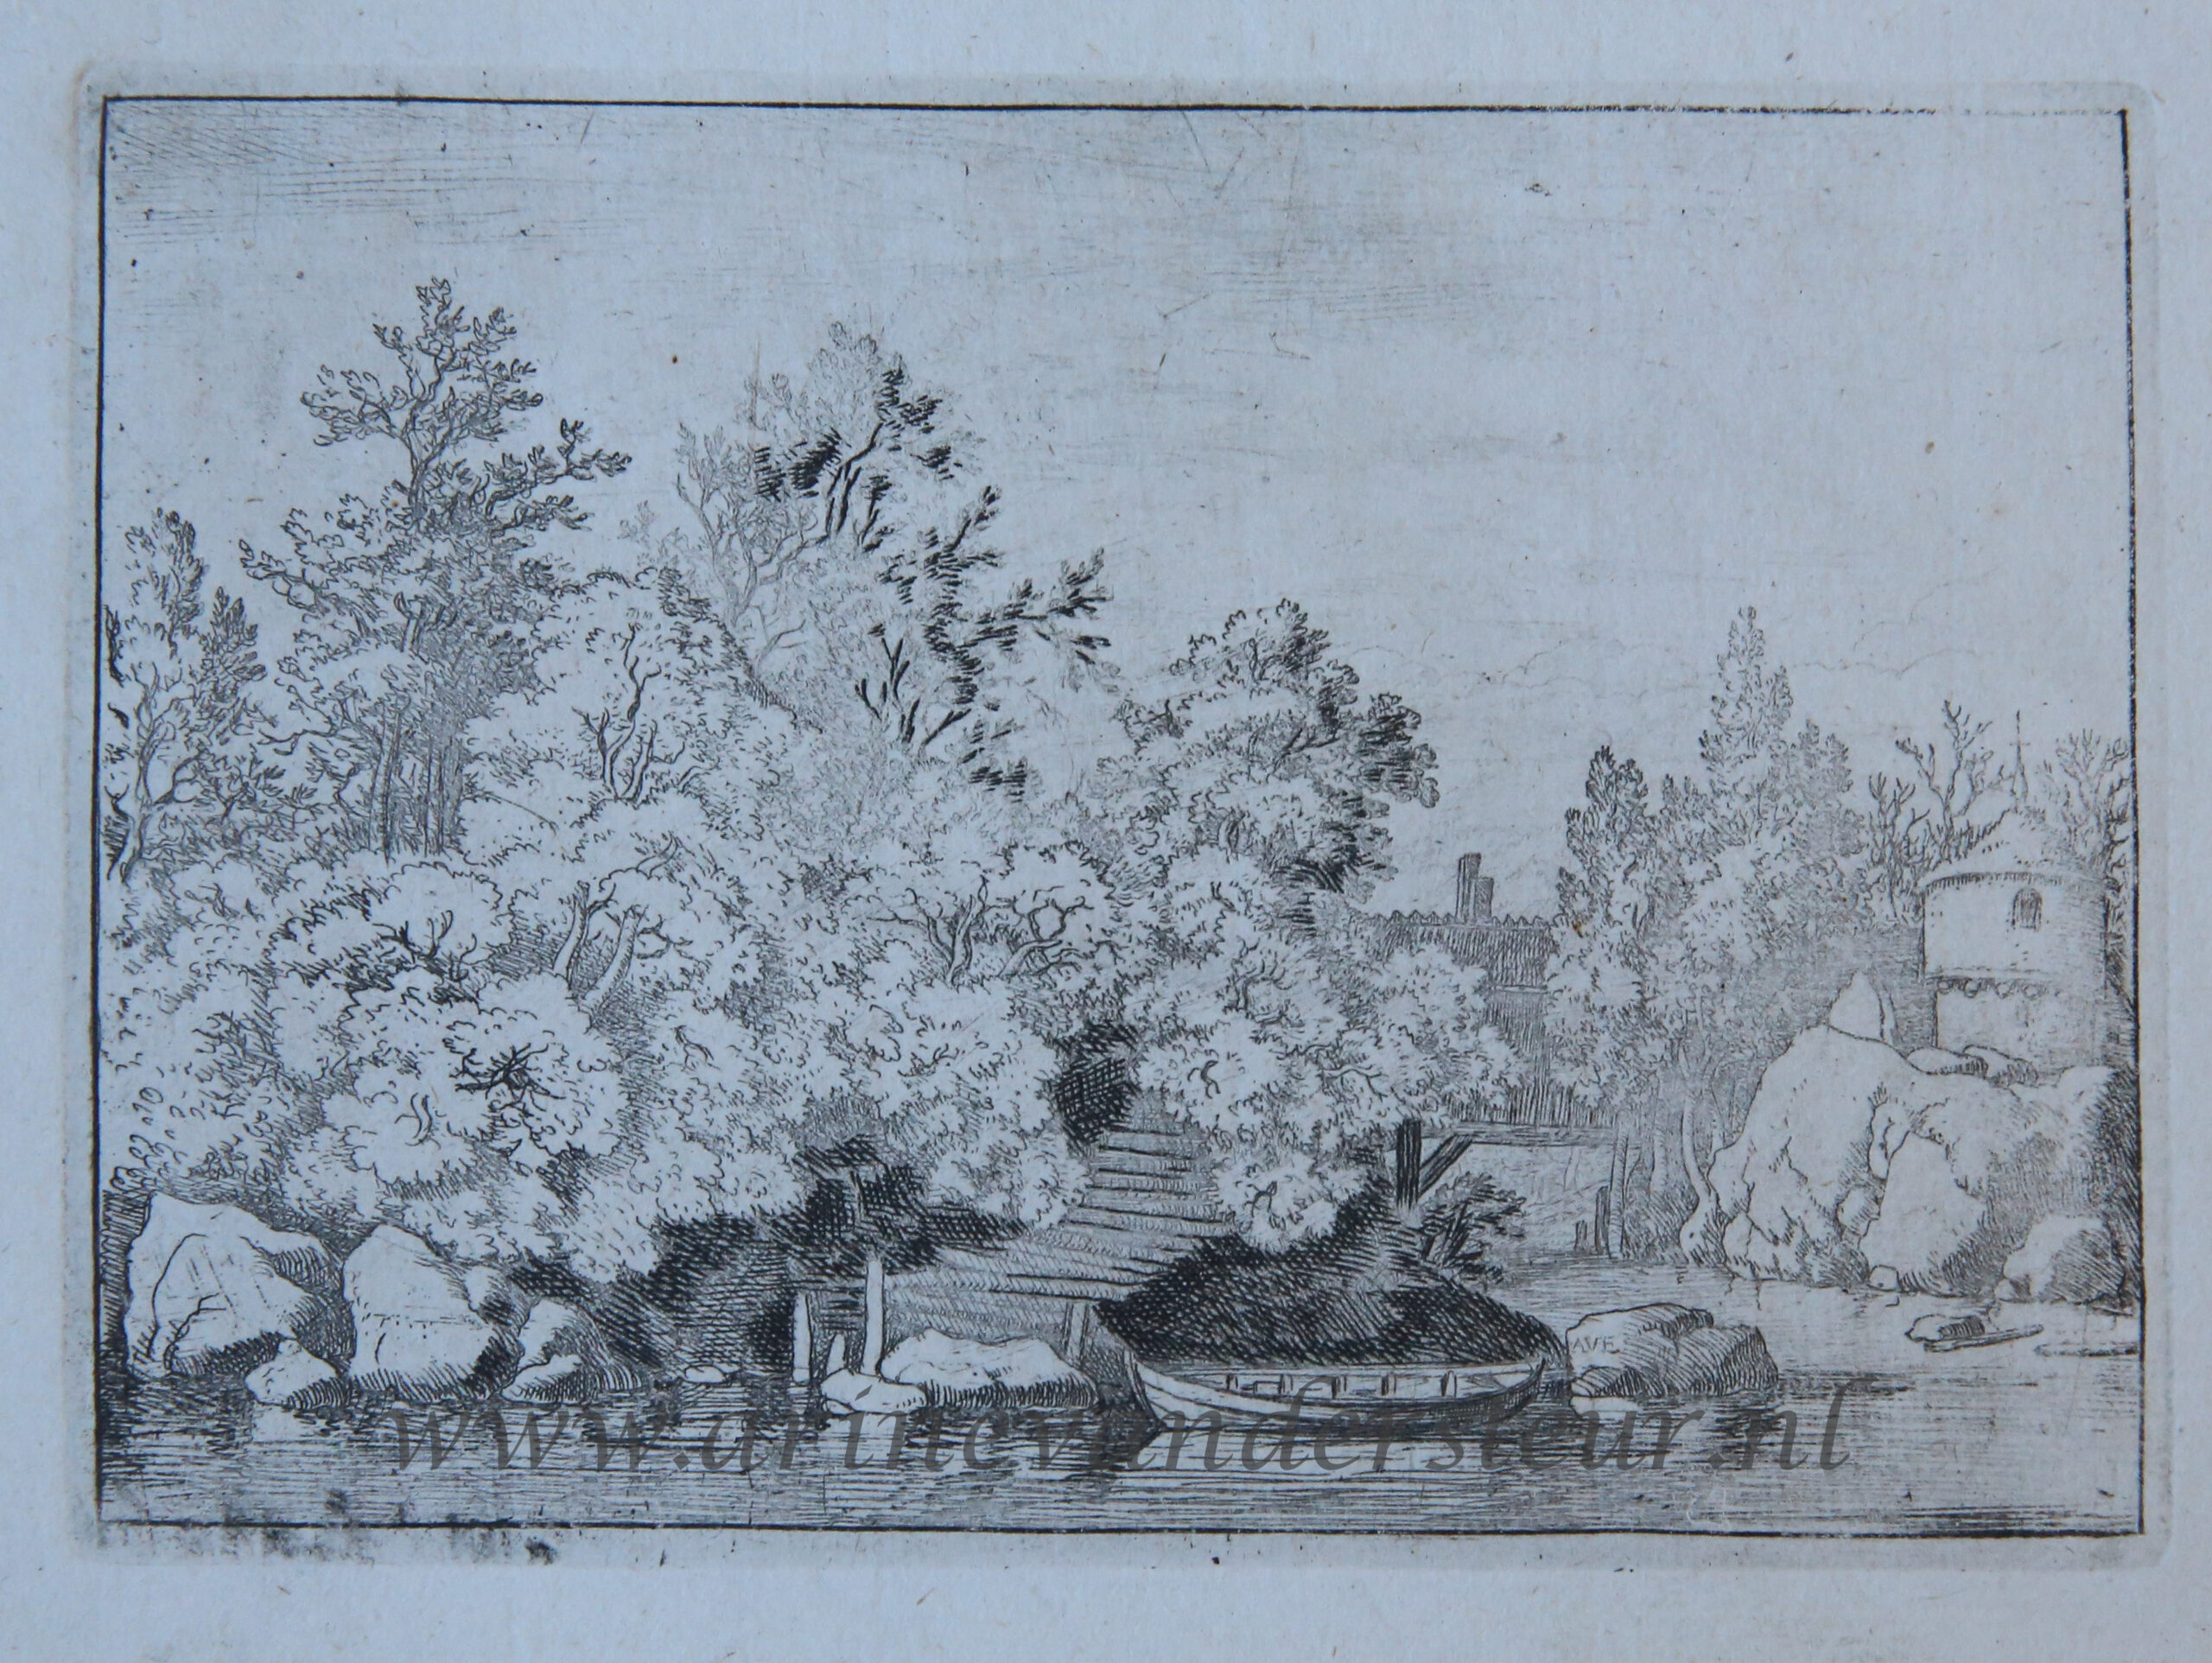 [Antique print, etching, landscape] The Cudgel Dam and the Covered bridge, published between 1631-1675.